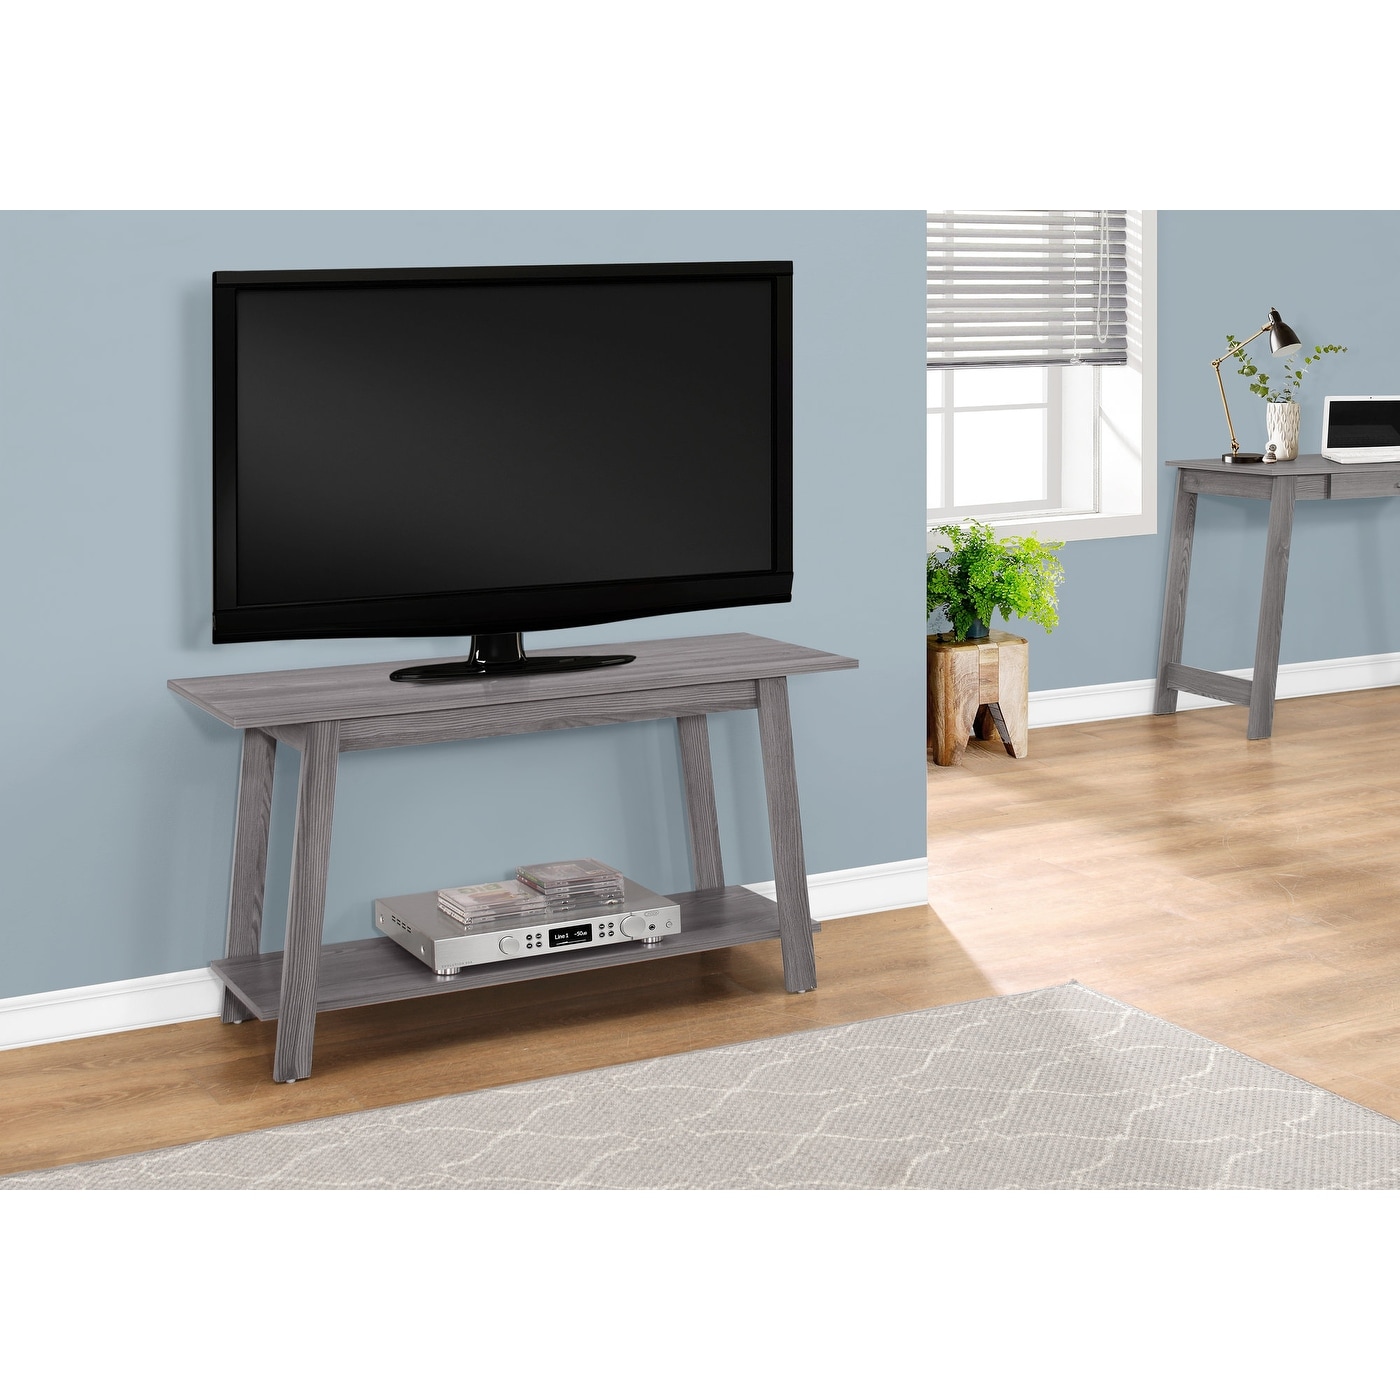 Monarch 2737 Grey 42nch TV Stand